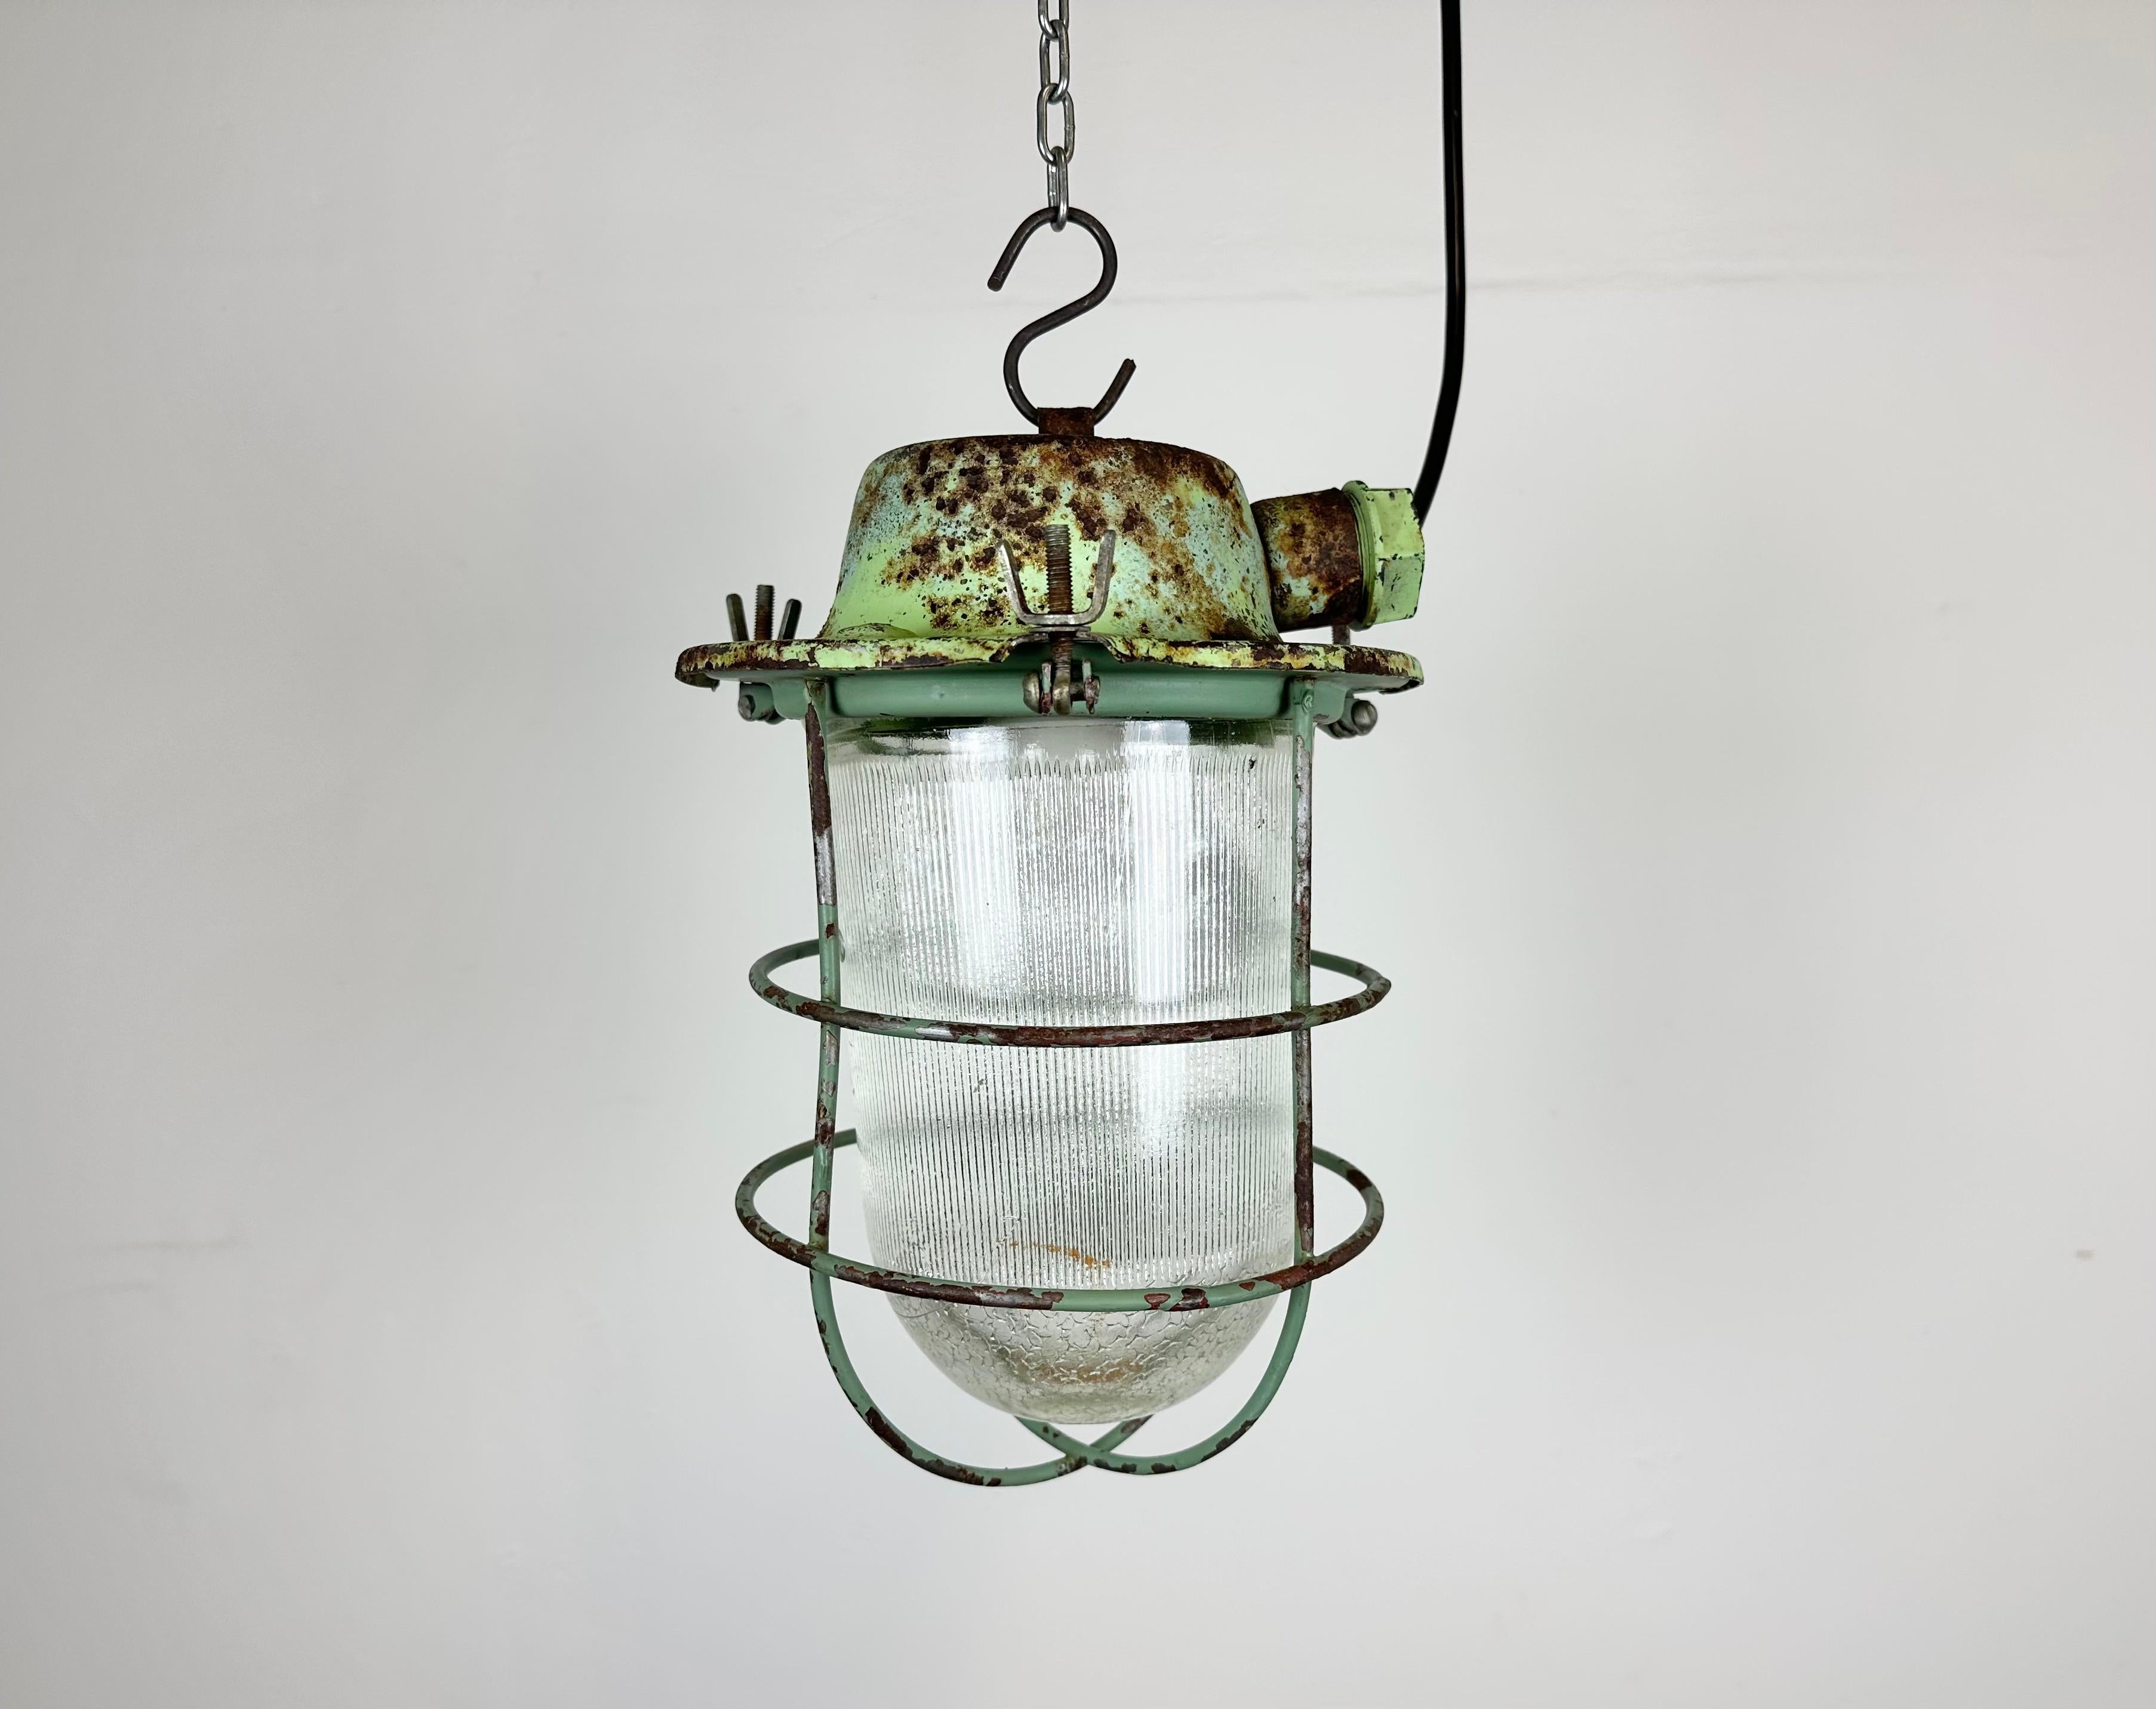 - Vintage Industrial lamp from the 1960s 
- Made in former Soviet Union
- Green iron top and grid
- Stripped glass cover
- The socket requires E 27/ E26 lightbulbs 
- New wire 
- Diameter: 22 cm
- Weight : 3 kg.